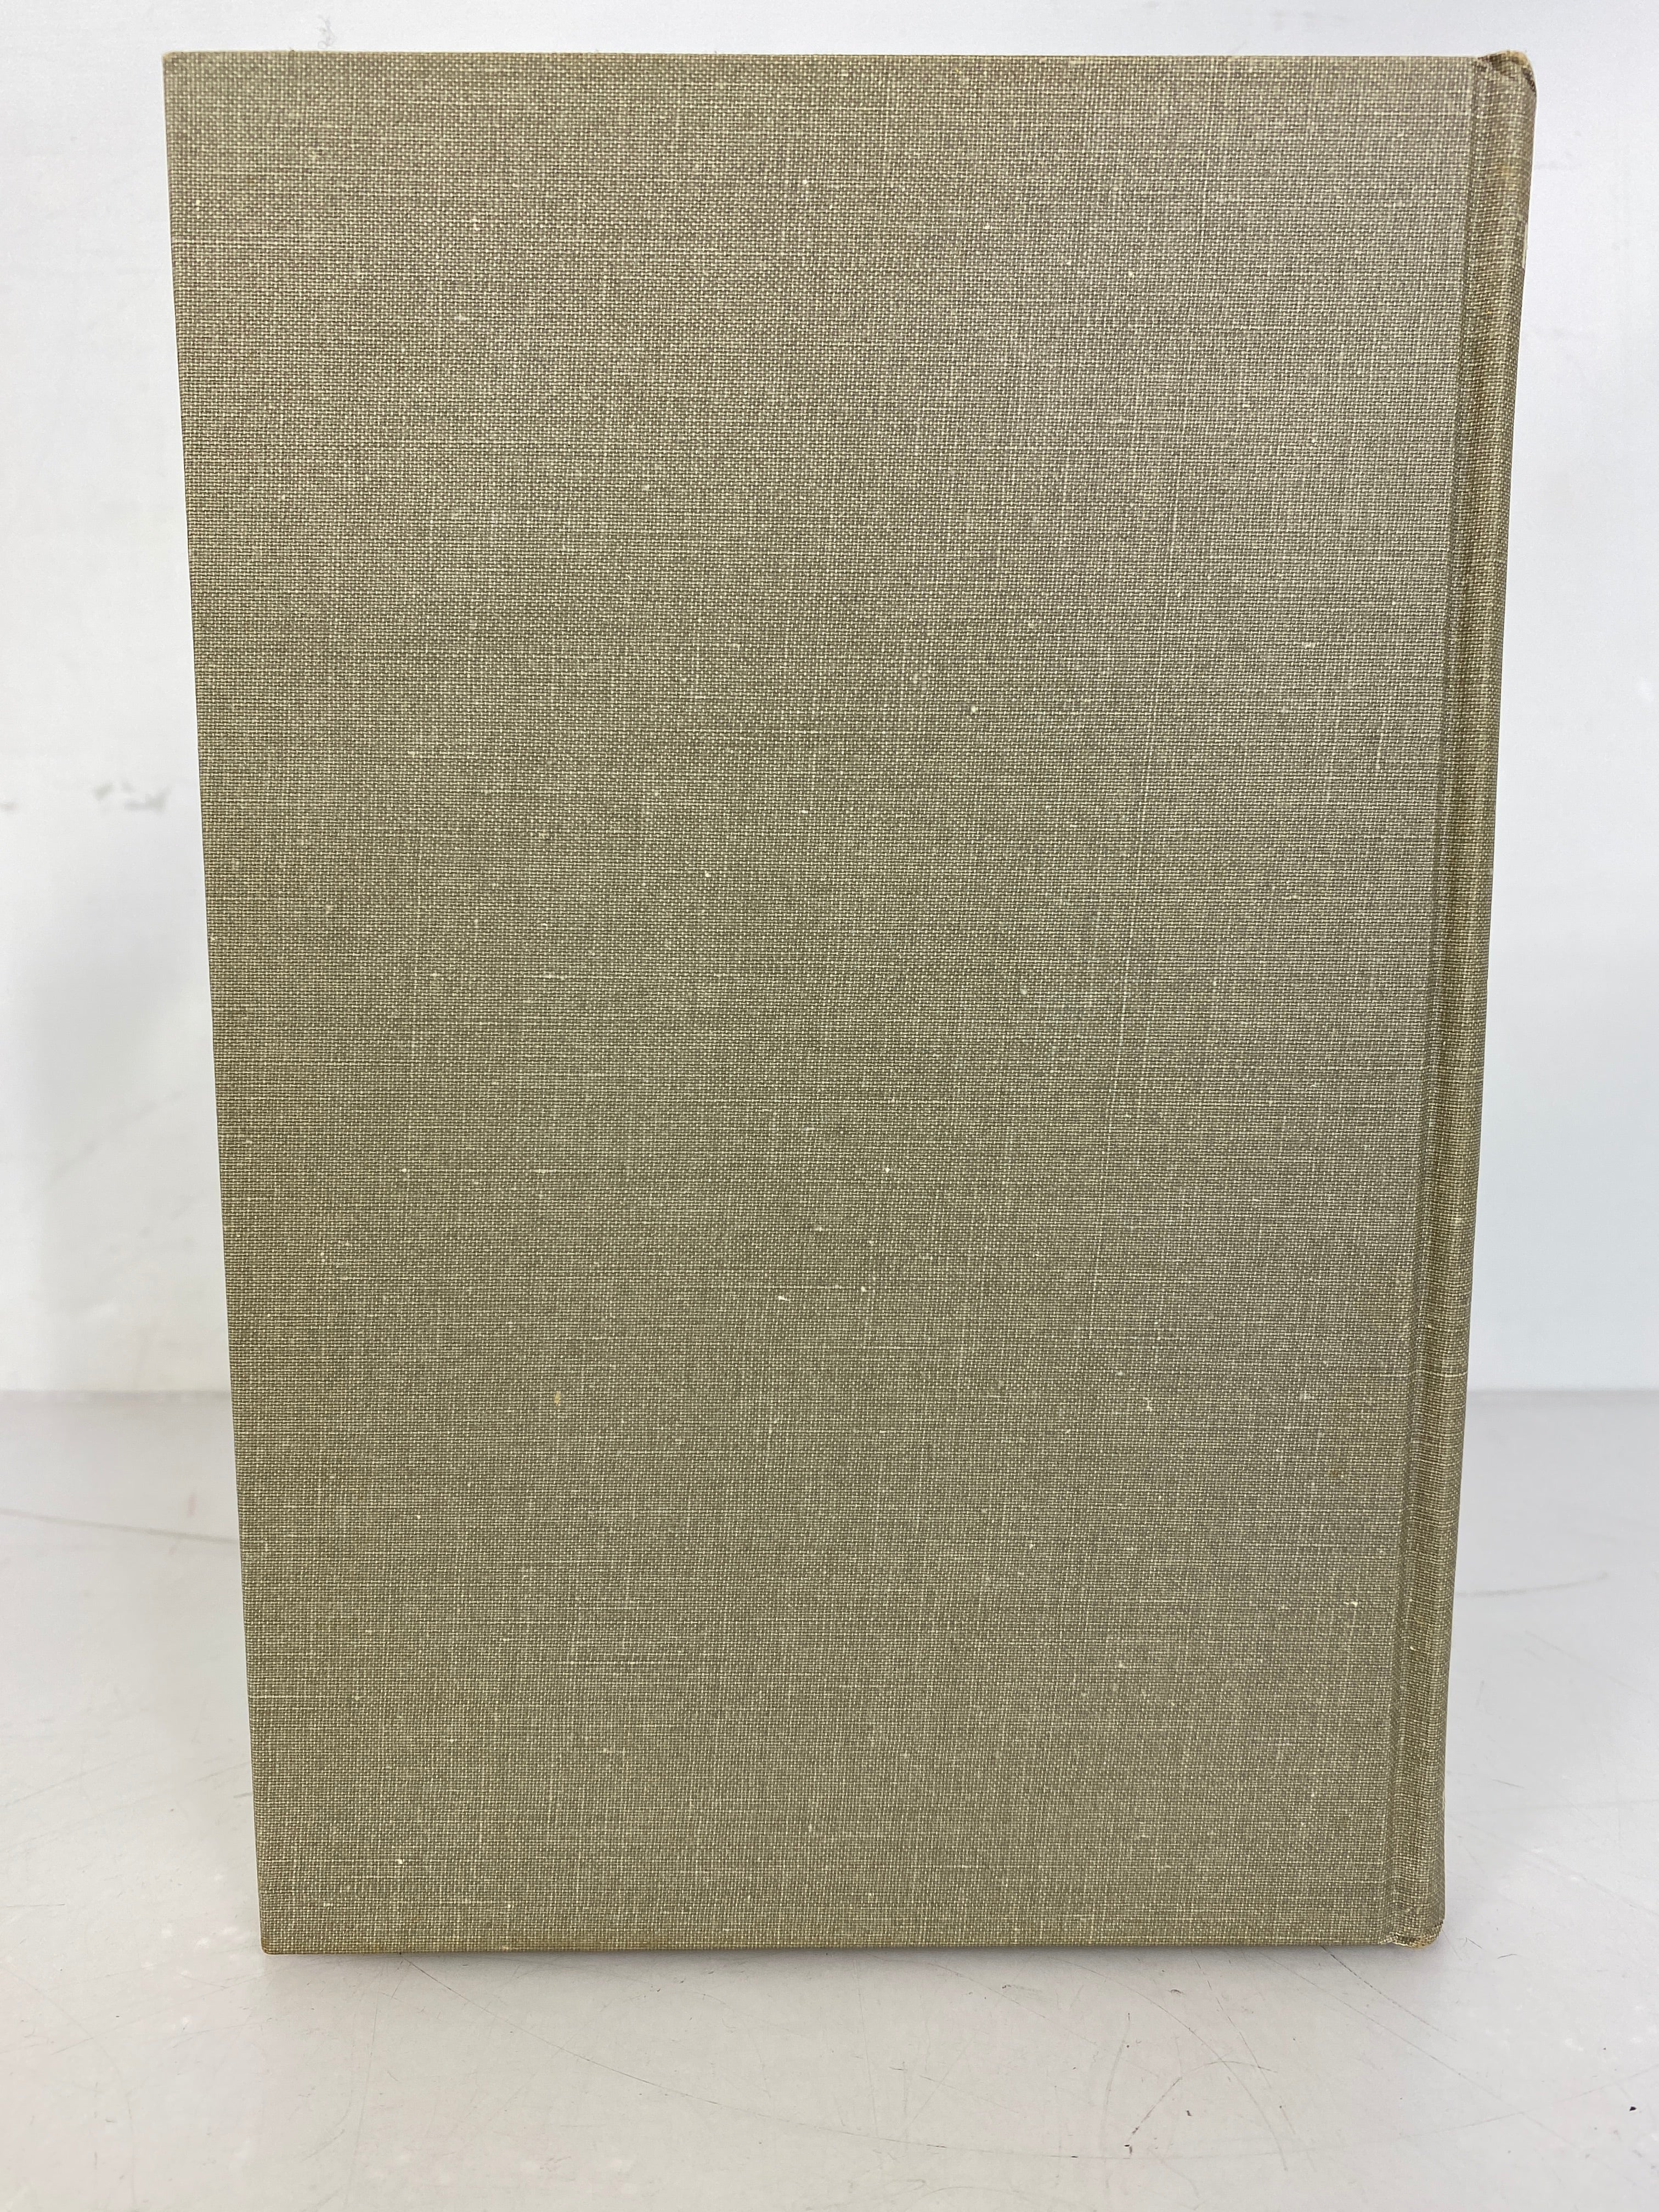 Lot of 2 Analytic Geometry Textbooks by Rees, Protter and Morrey 1964, 1967 HC DJ